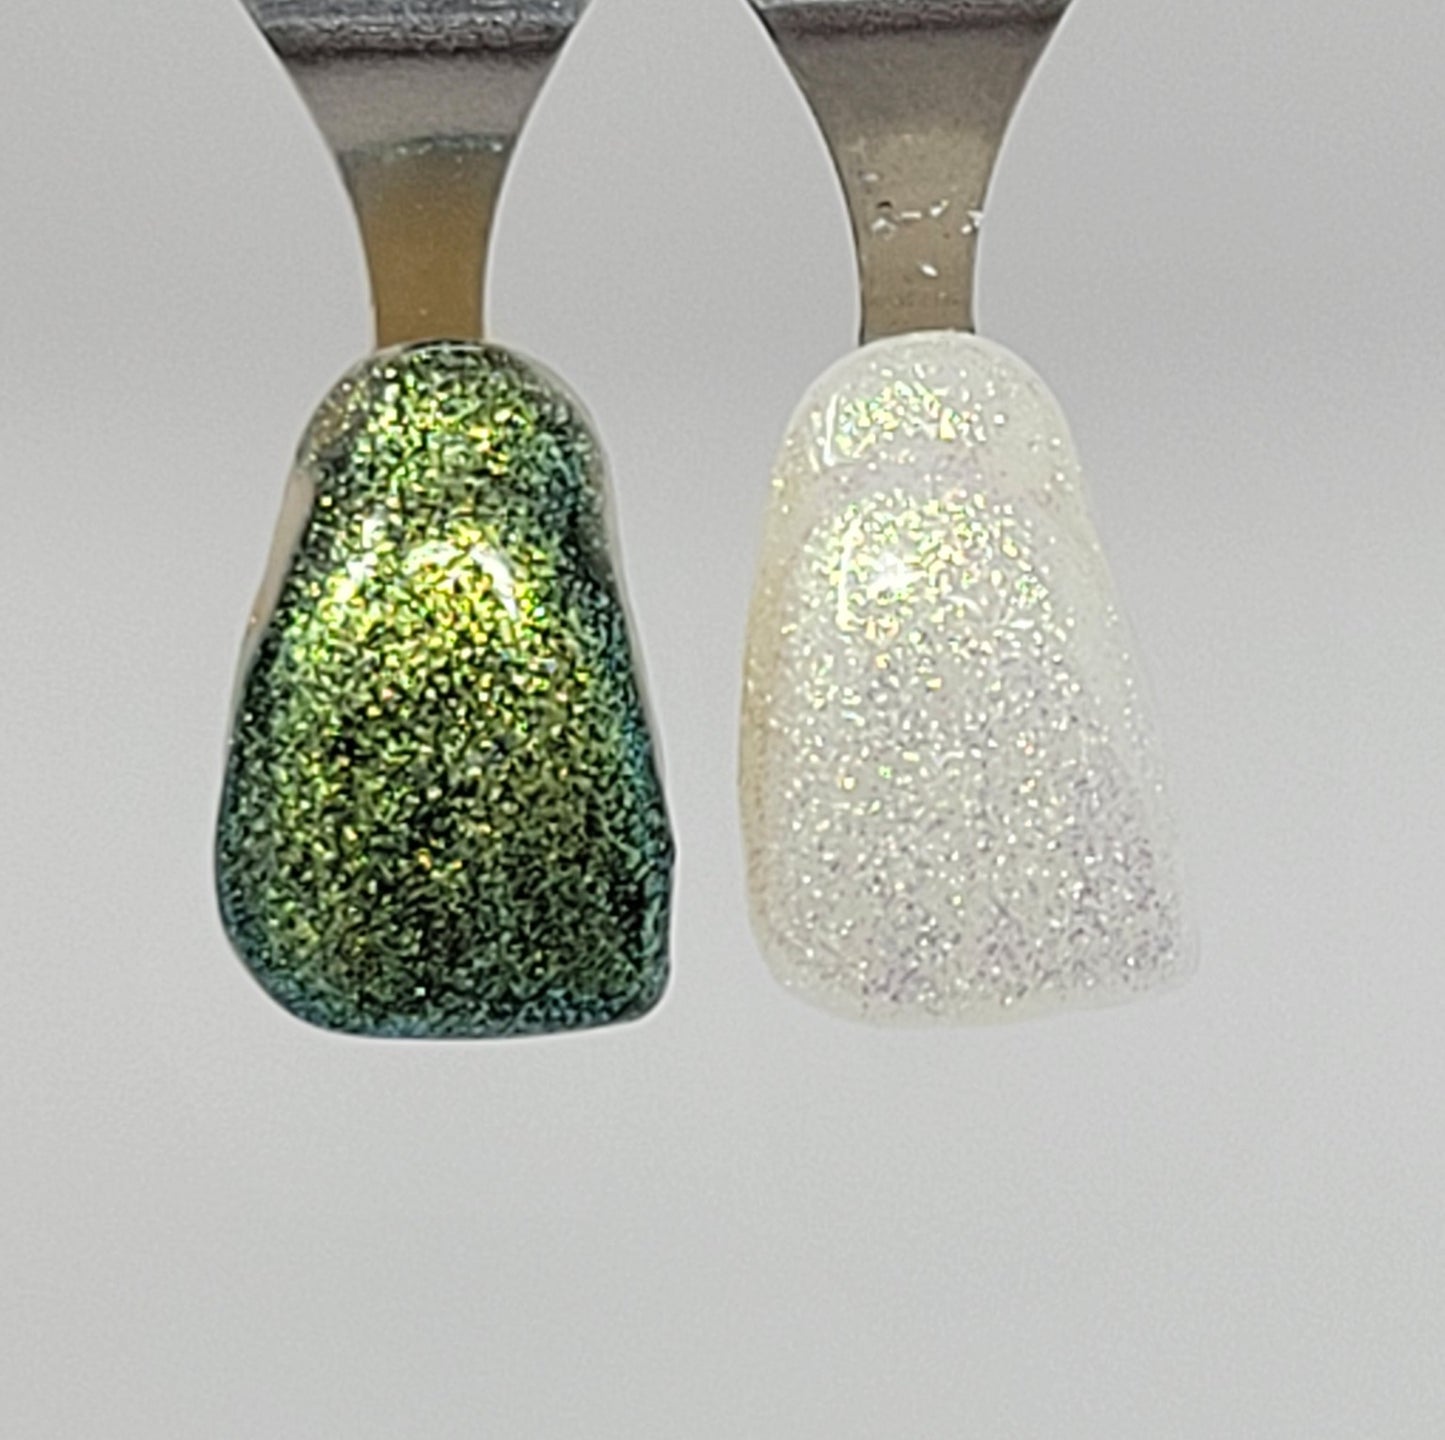 Lime Galaxy Temporary Tattooth Colorant on a demo tooth.  These colorants can be applied to teeth to temporarily alter their color or iridescence.